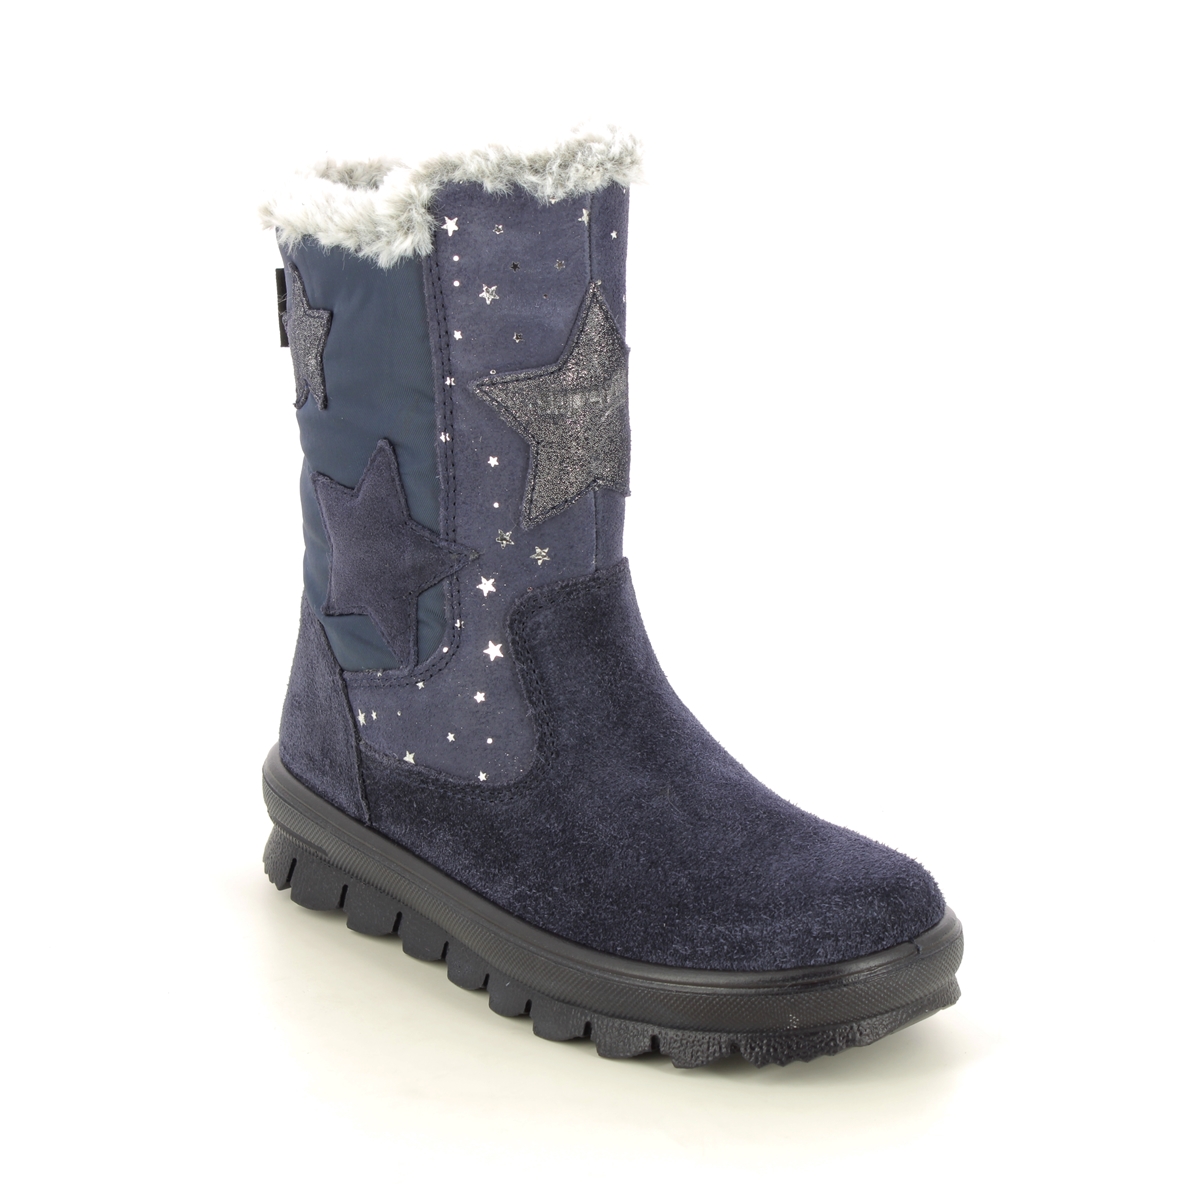 Superfit Flavia Star Gtx Navy Suede Kids Girls Boots 1000219-8000 In Size 28 In Plain Navy Suede For kids